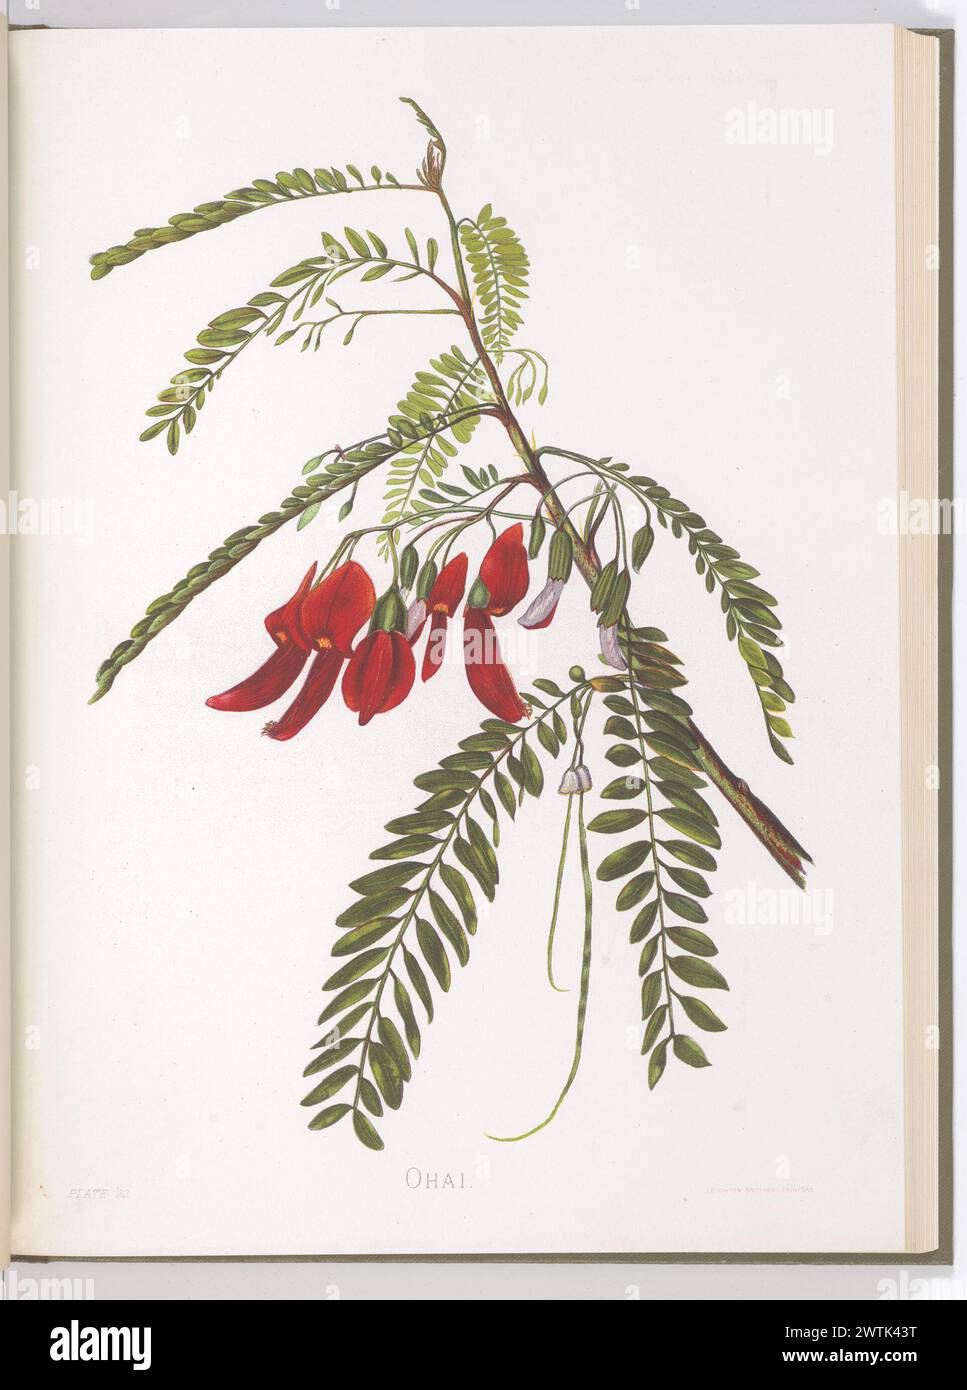 Ohai. Plate 22 from the book: Indigenous flowers of the Hawaiian Islands Stock Photo